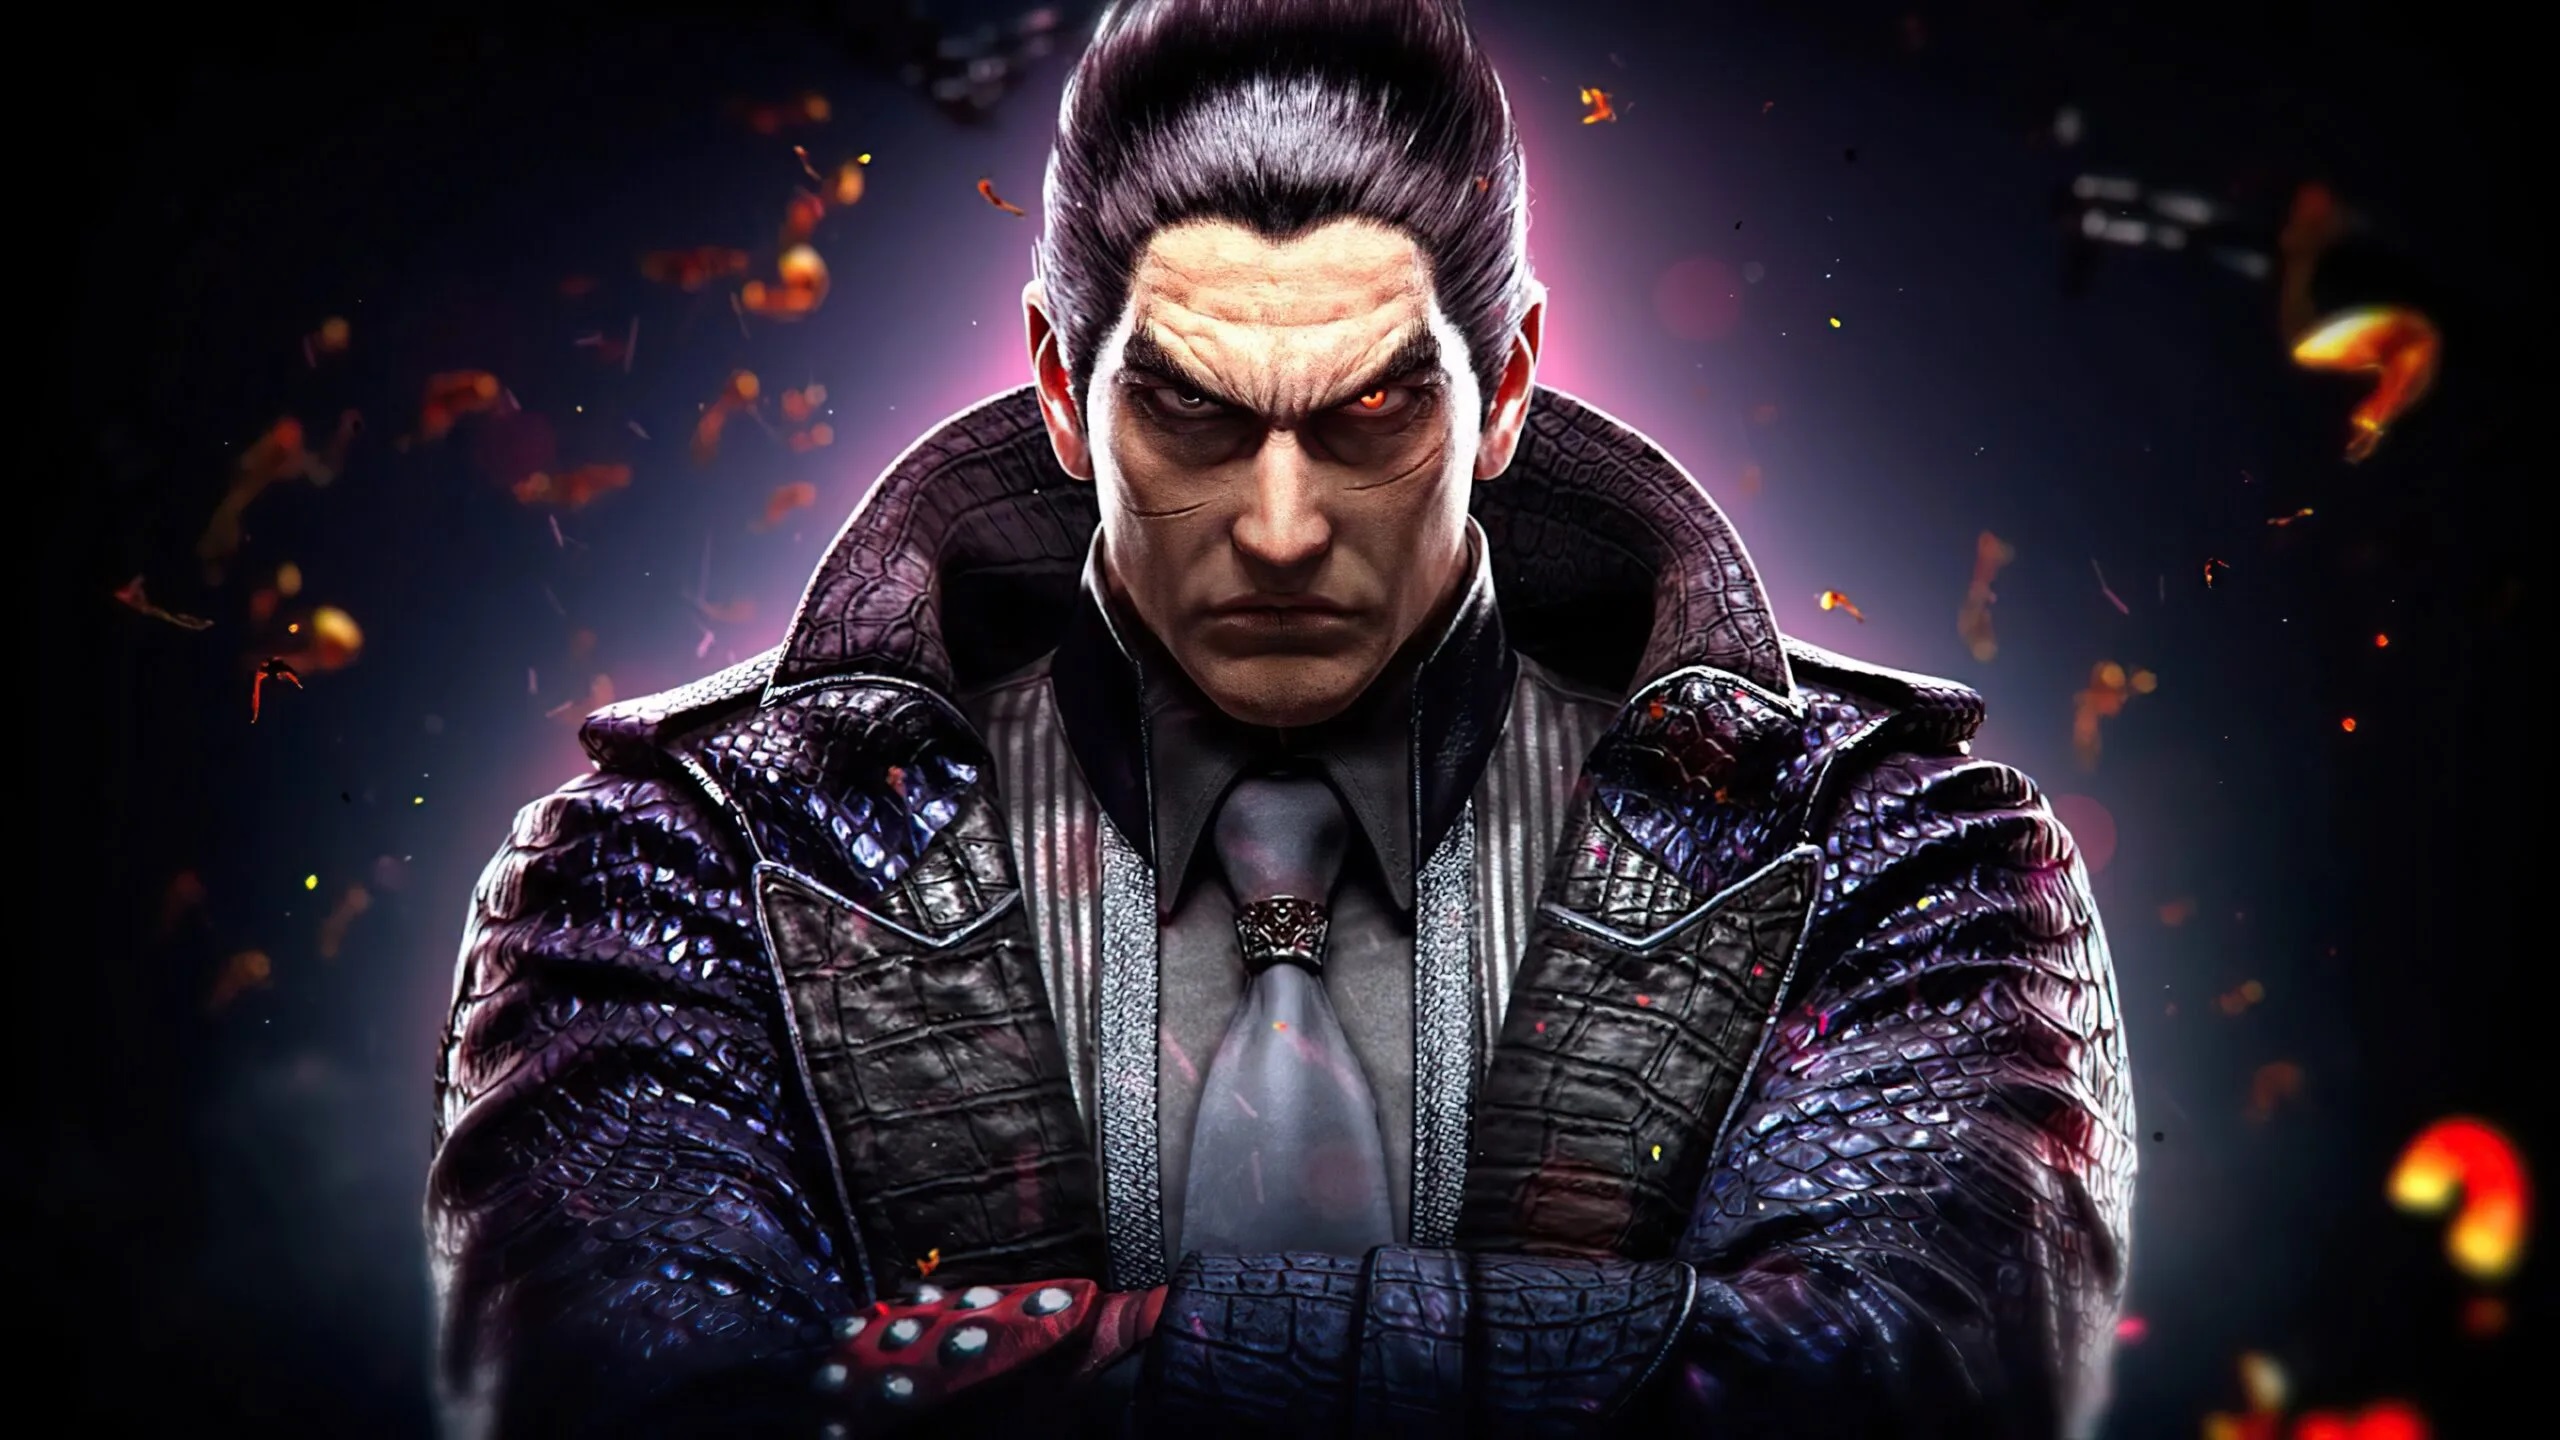 Tekken 8 Director Confirms the Game Won't Feature Denuvo on PC